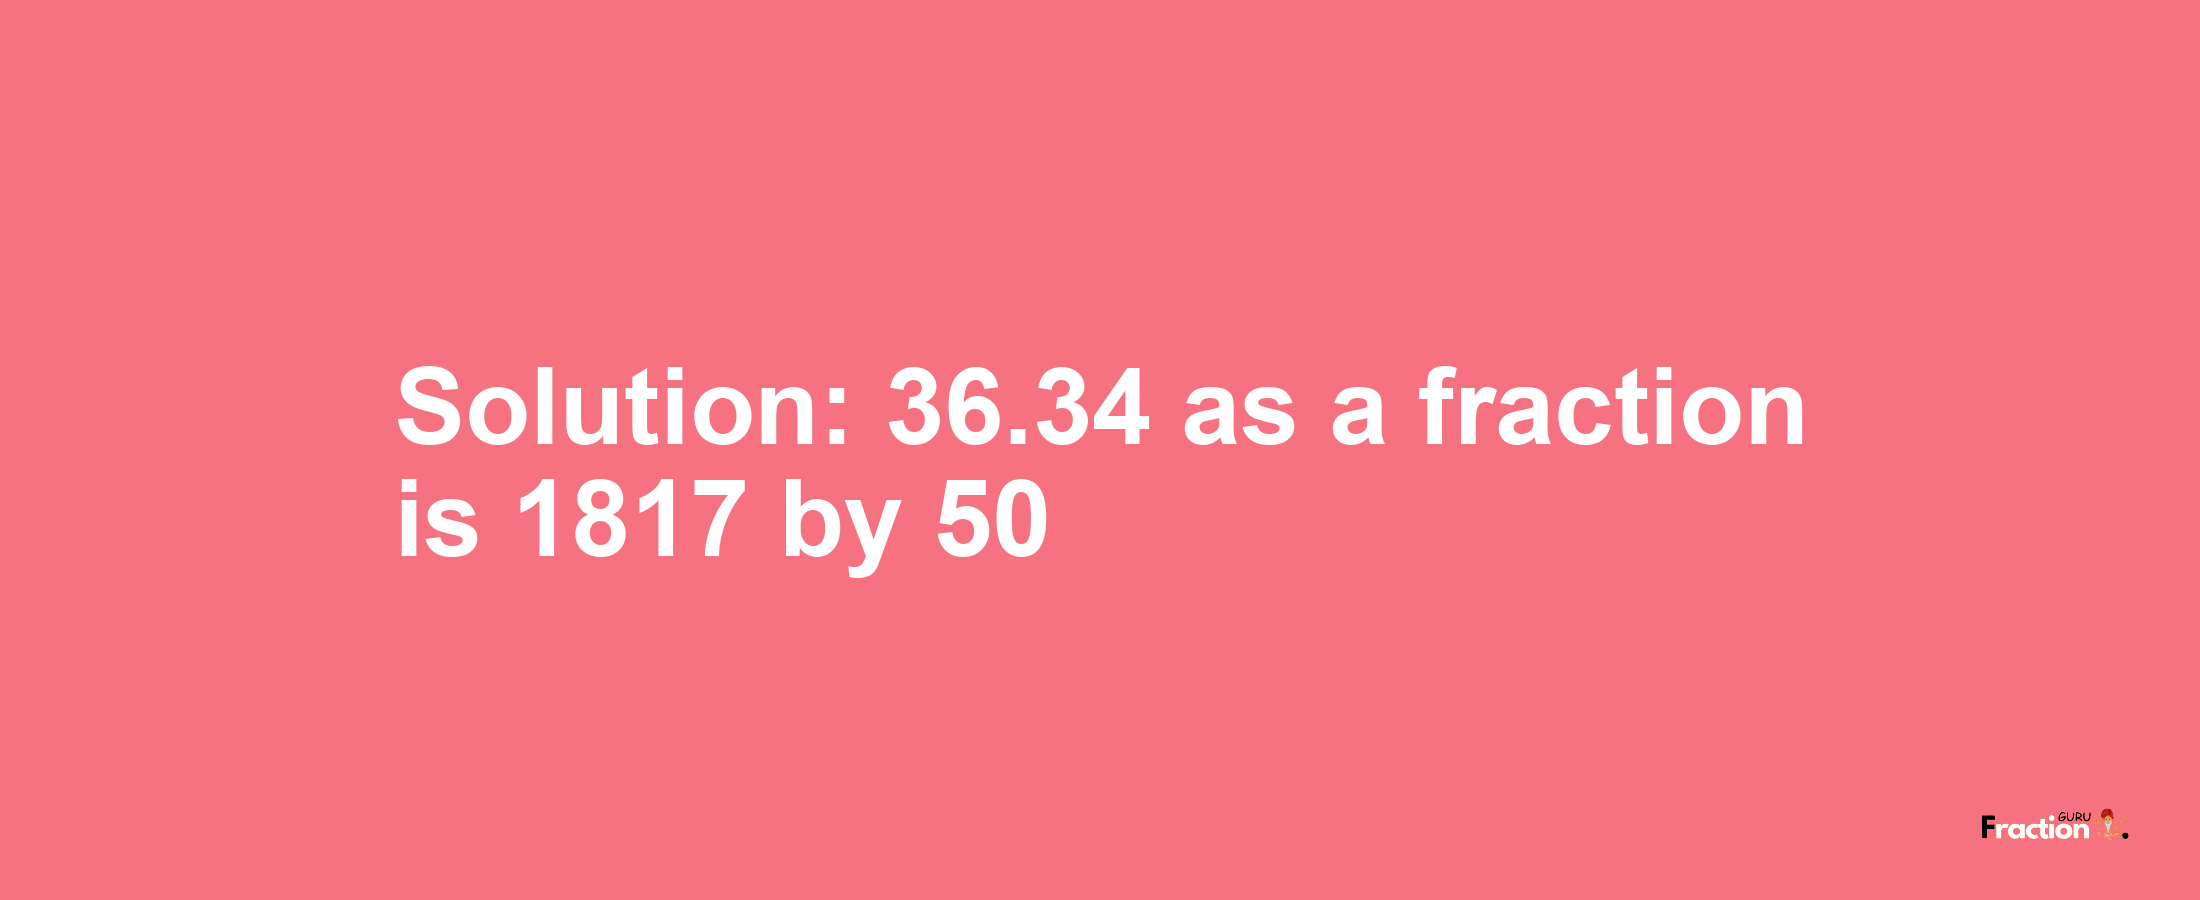 Solution:36.34 as a fraction is 1817/50